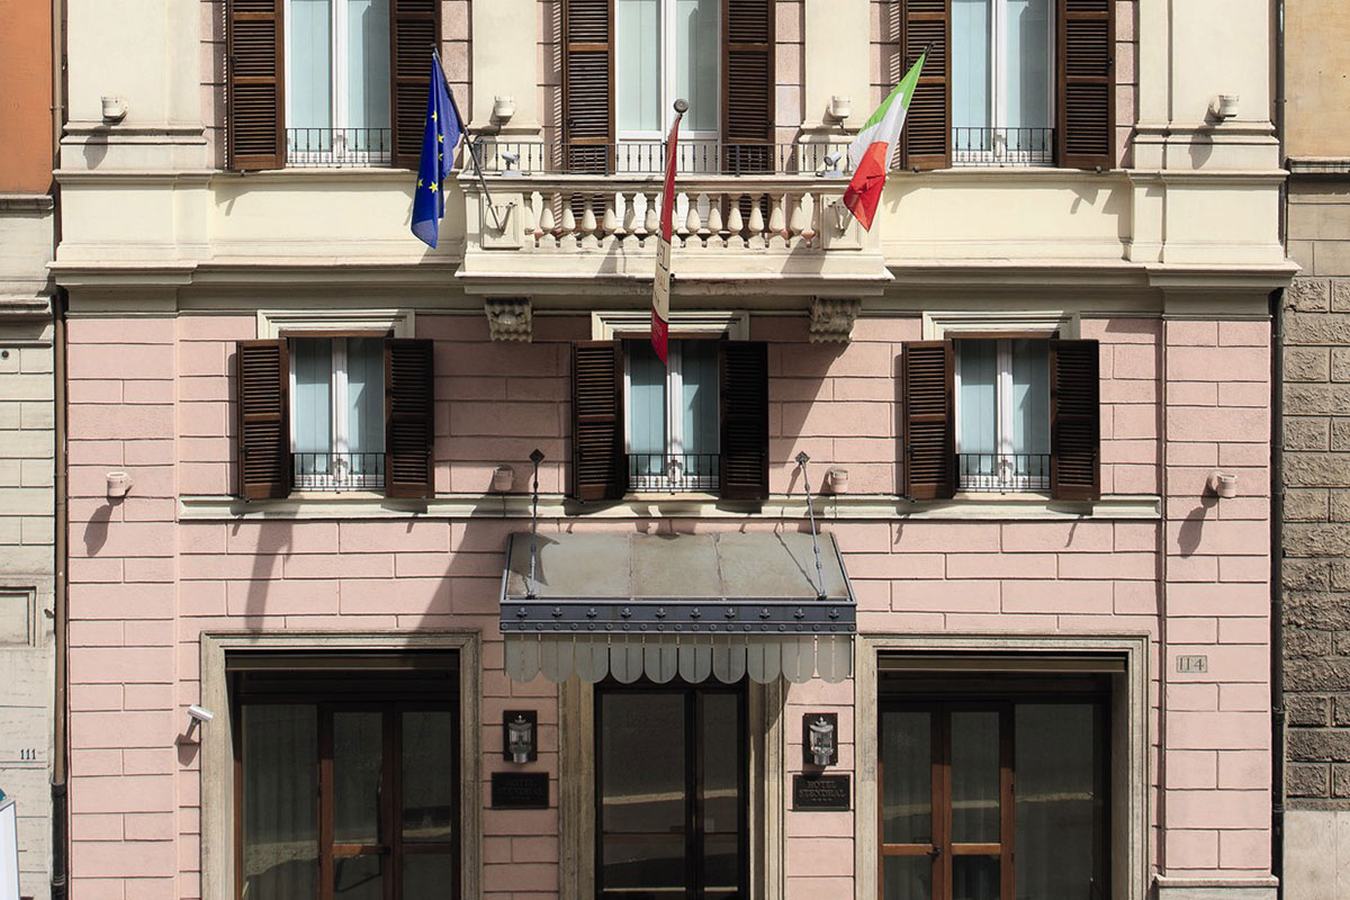 Hotel Stendhal Rome - Italy